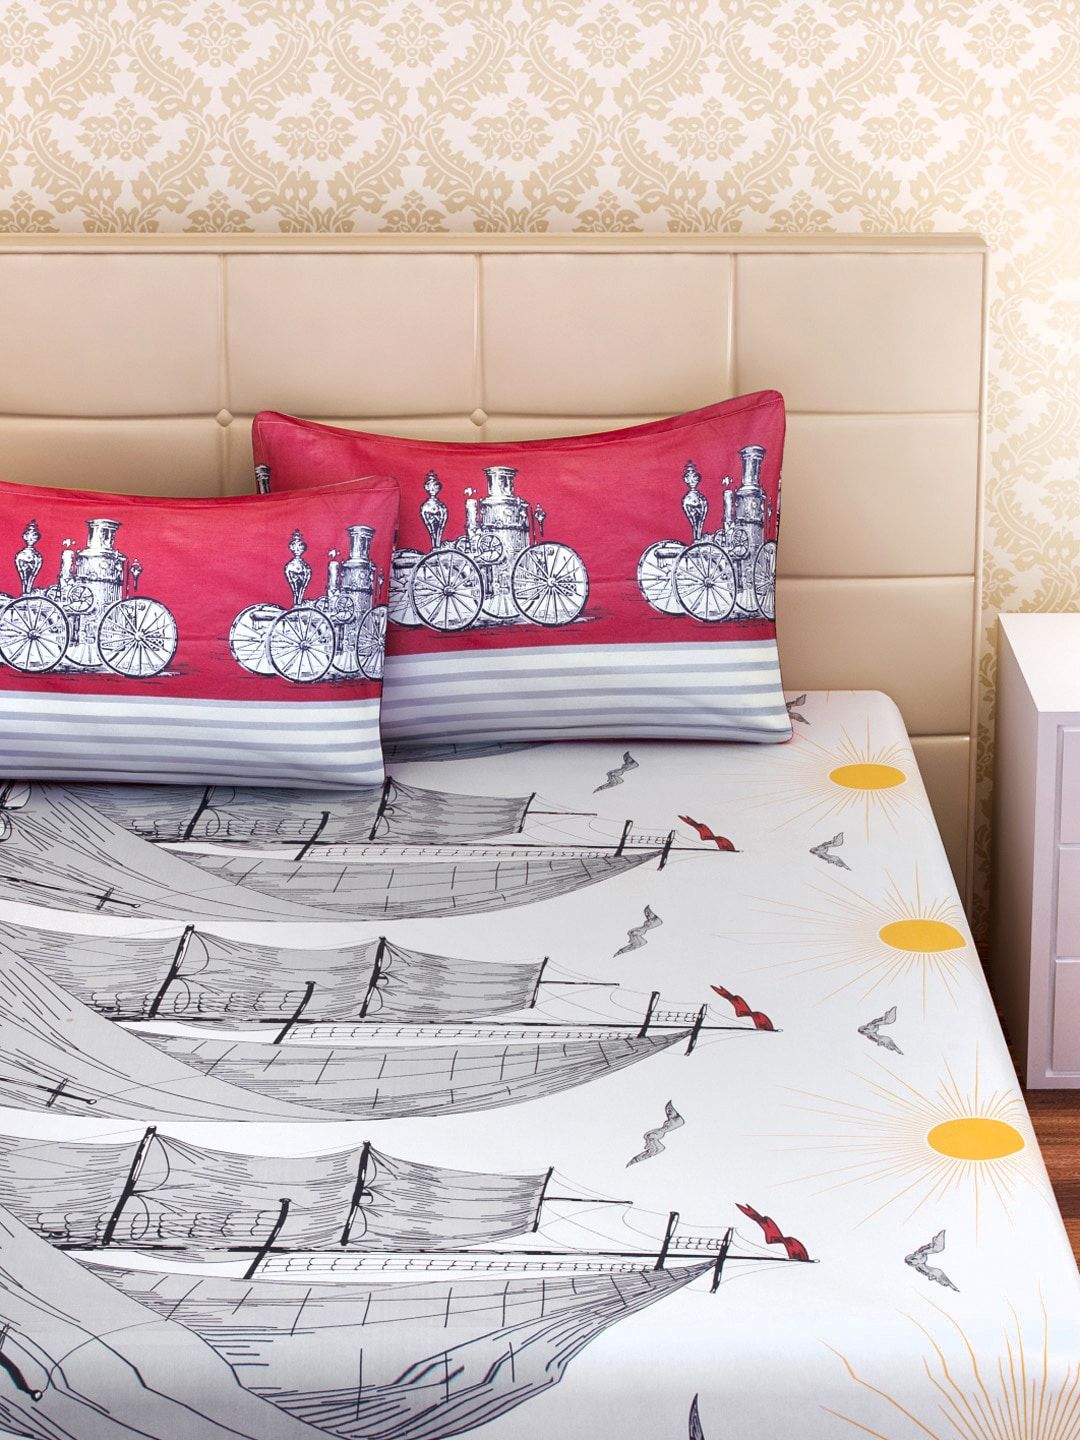 SEJ by Nisha Gupta White & Grey Cotton 180 TC Double King Bedsheet with 2 Pillow Covers Price in India